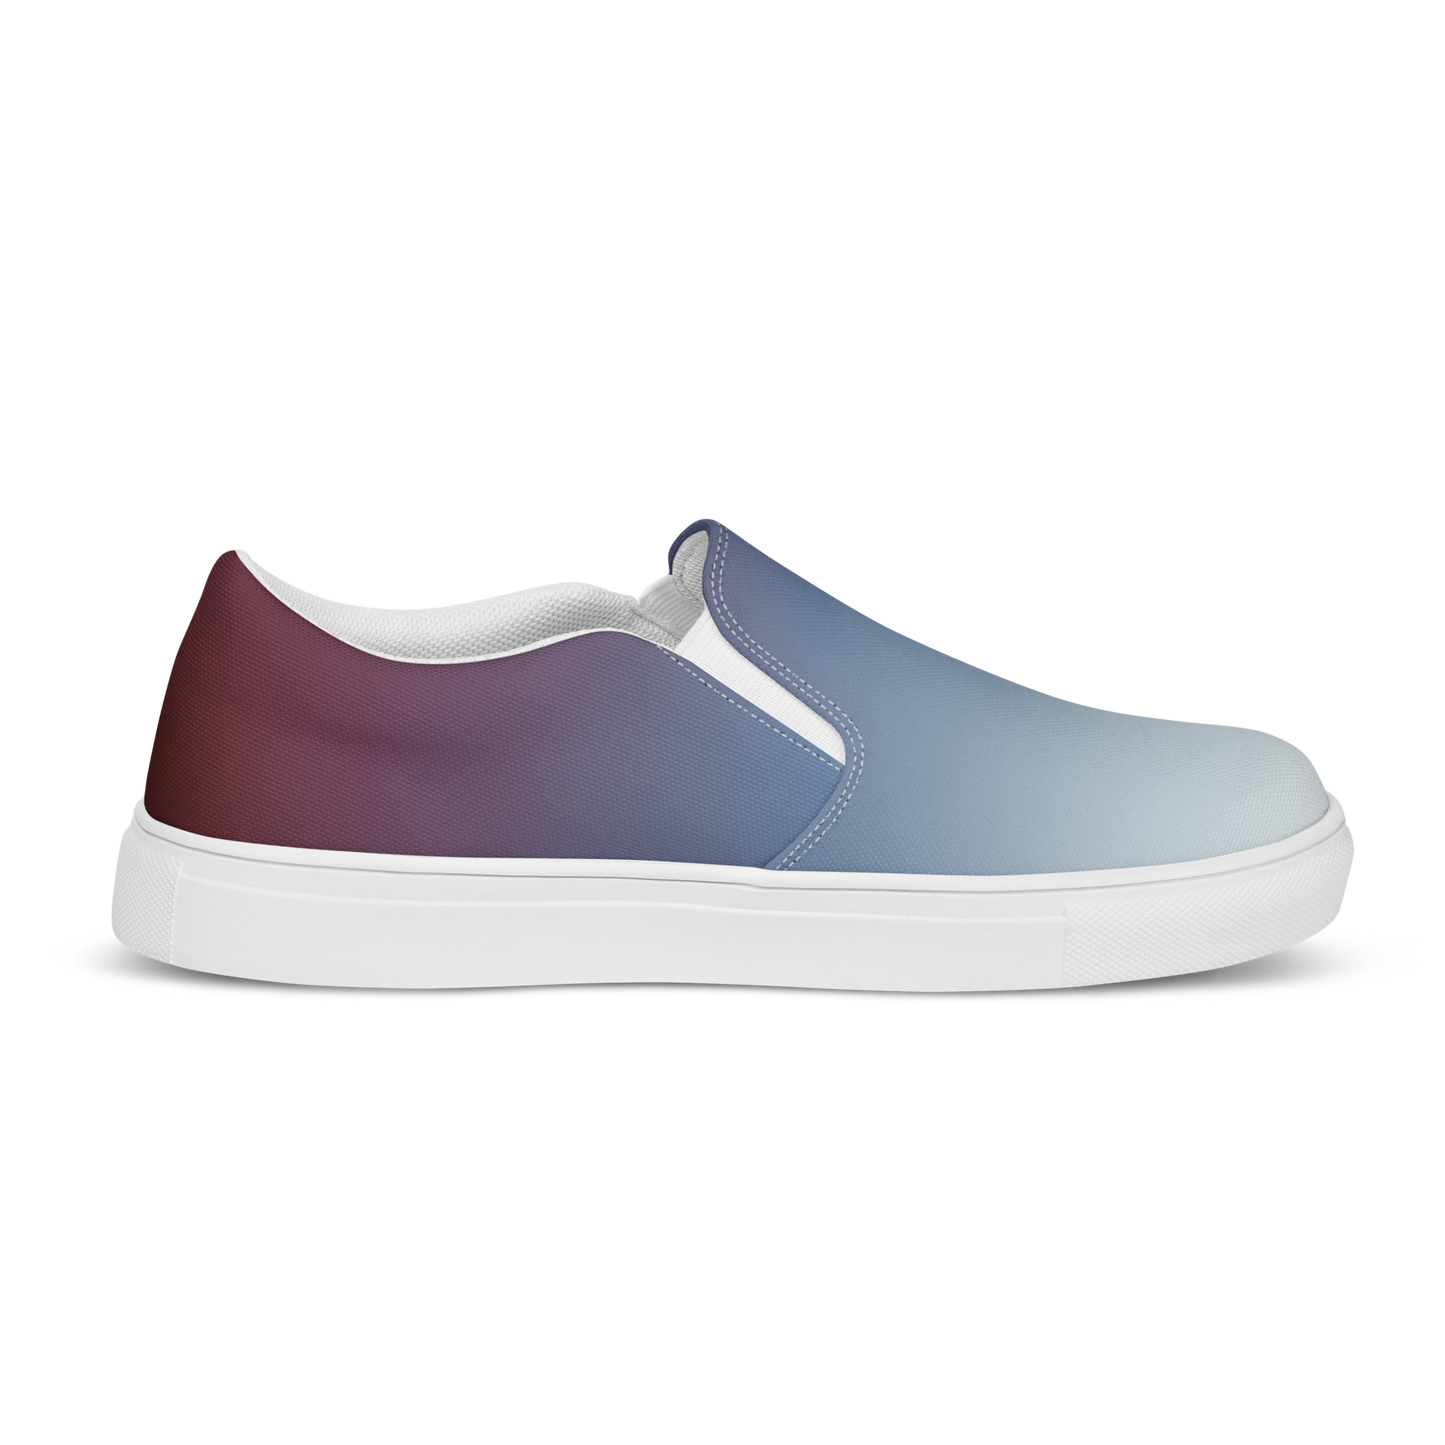 Men's Canvas Slip-ons ❯ Pure Gradient ❯ Chasse-galerie